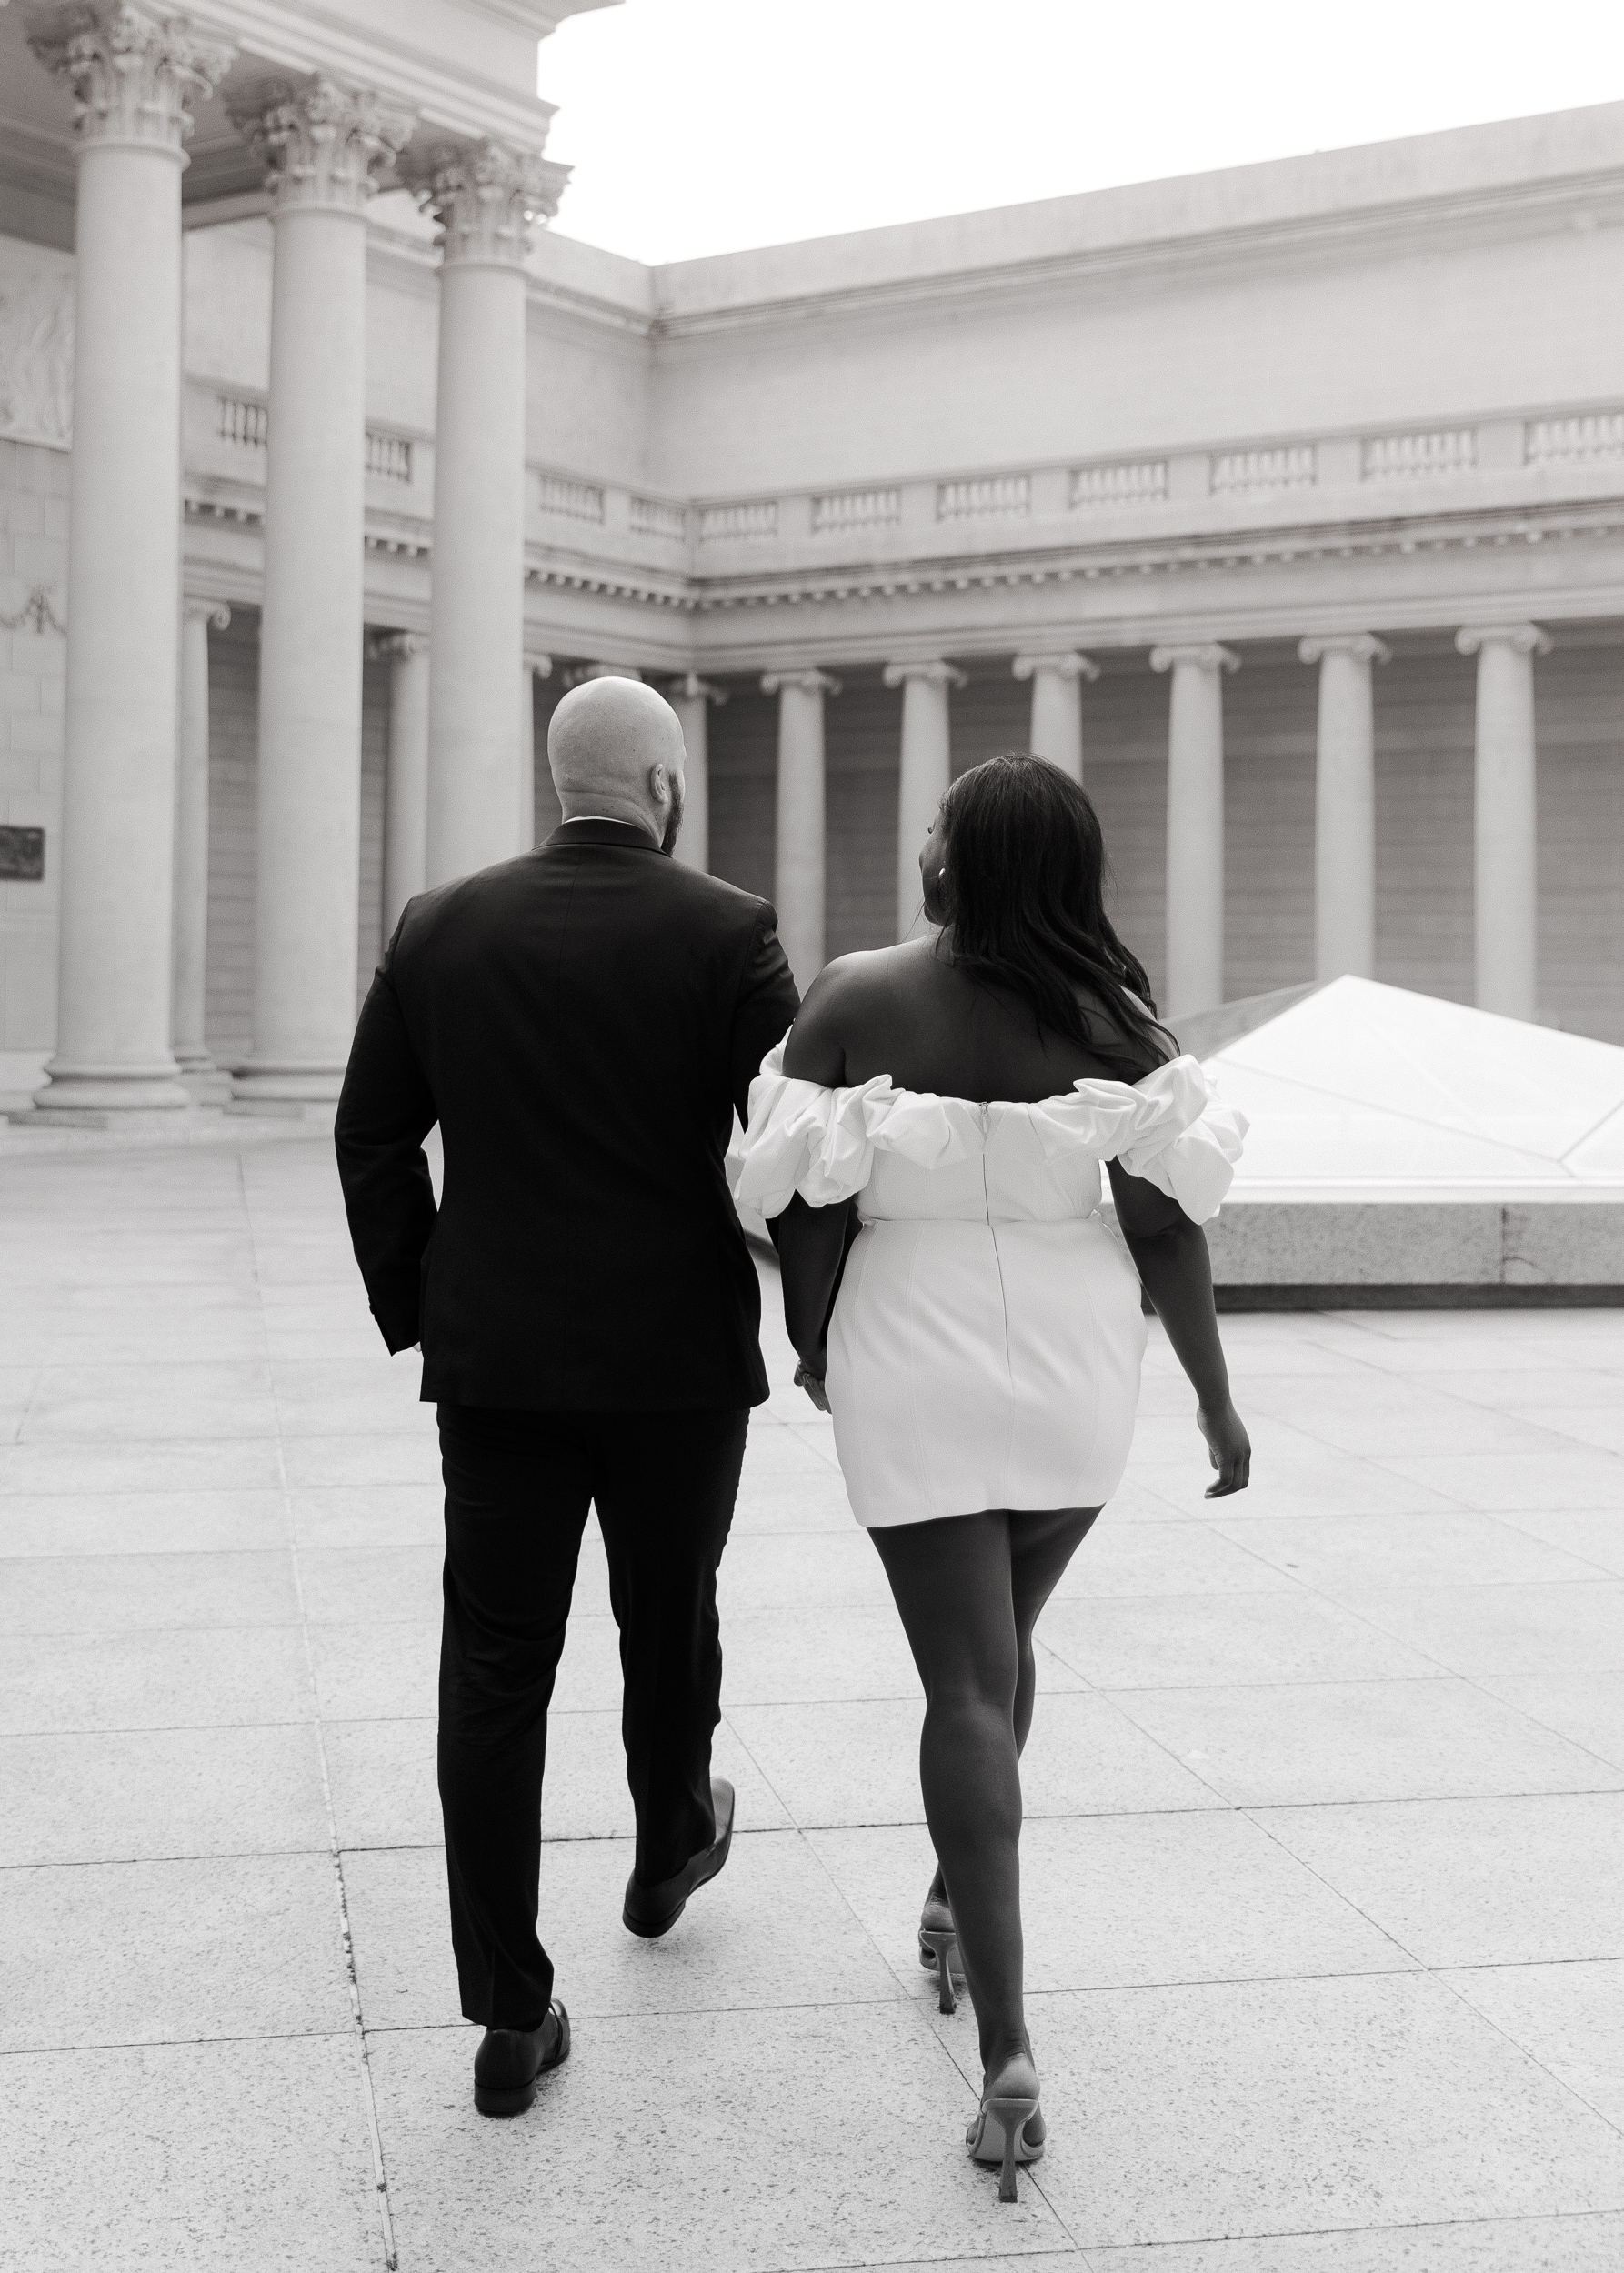 The couple walks hand in hand through the Legion of Honor's gardens, the fog casting an enchanting ambiance over the lush greenery and classical sculptures.